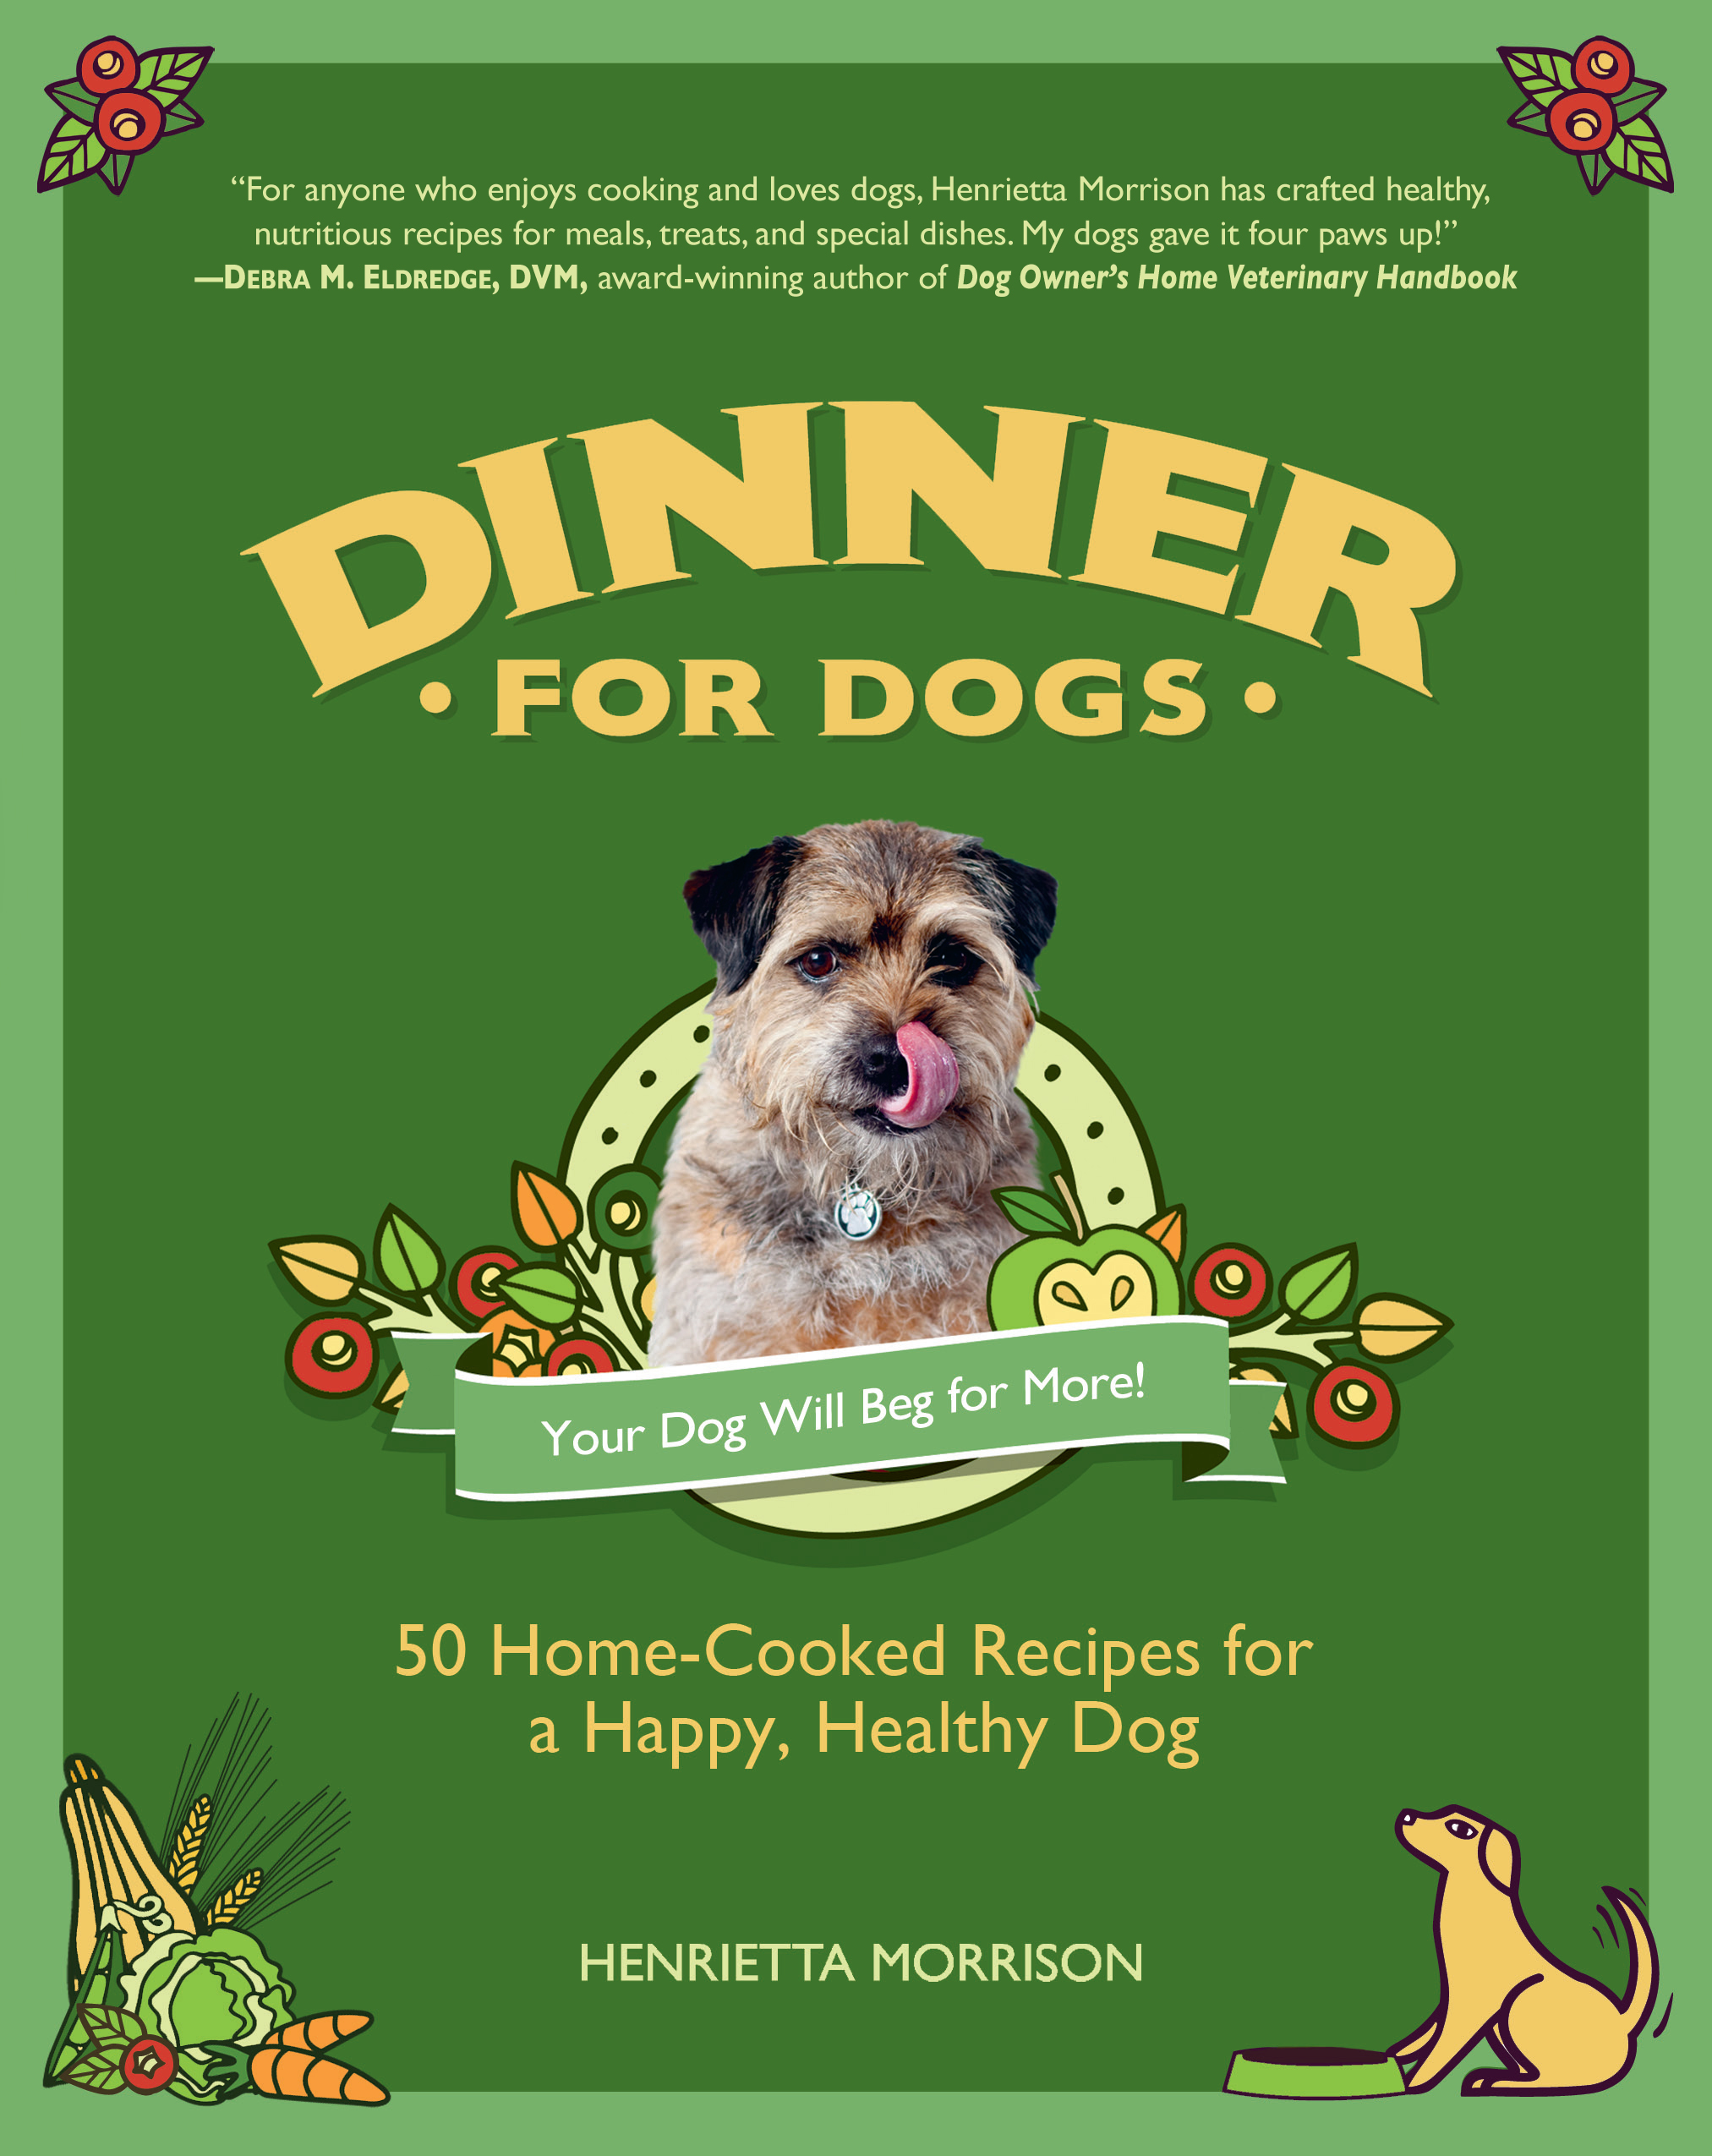 Dish dogs. Dog meal. Dog dish. Тетрадь Cookbook Dog. Dogs' dinners. The healthy, Happy way to Feed your Dog.